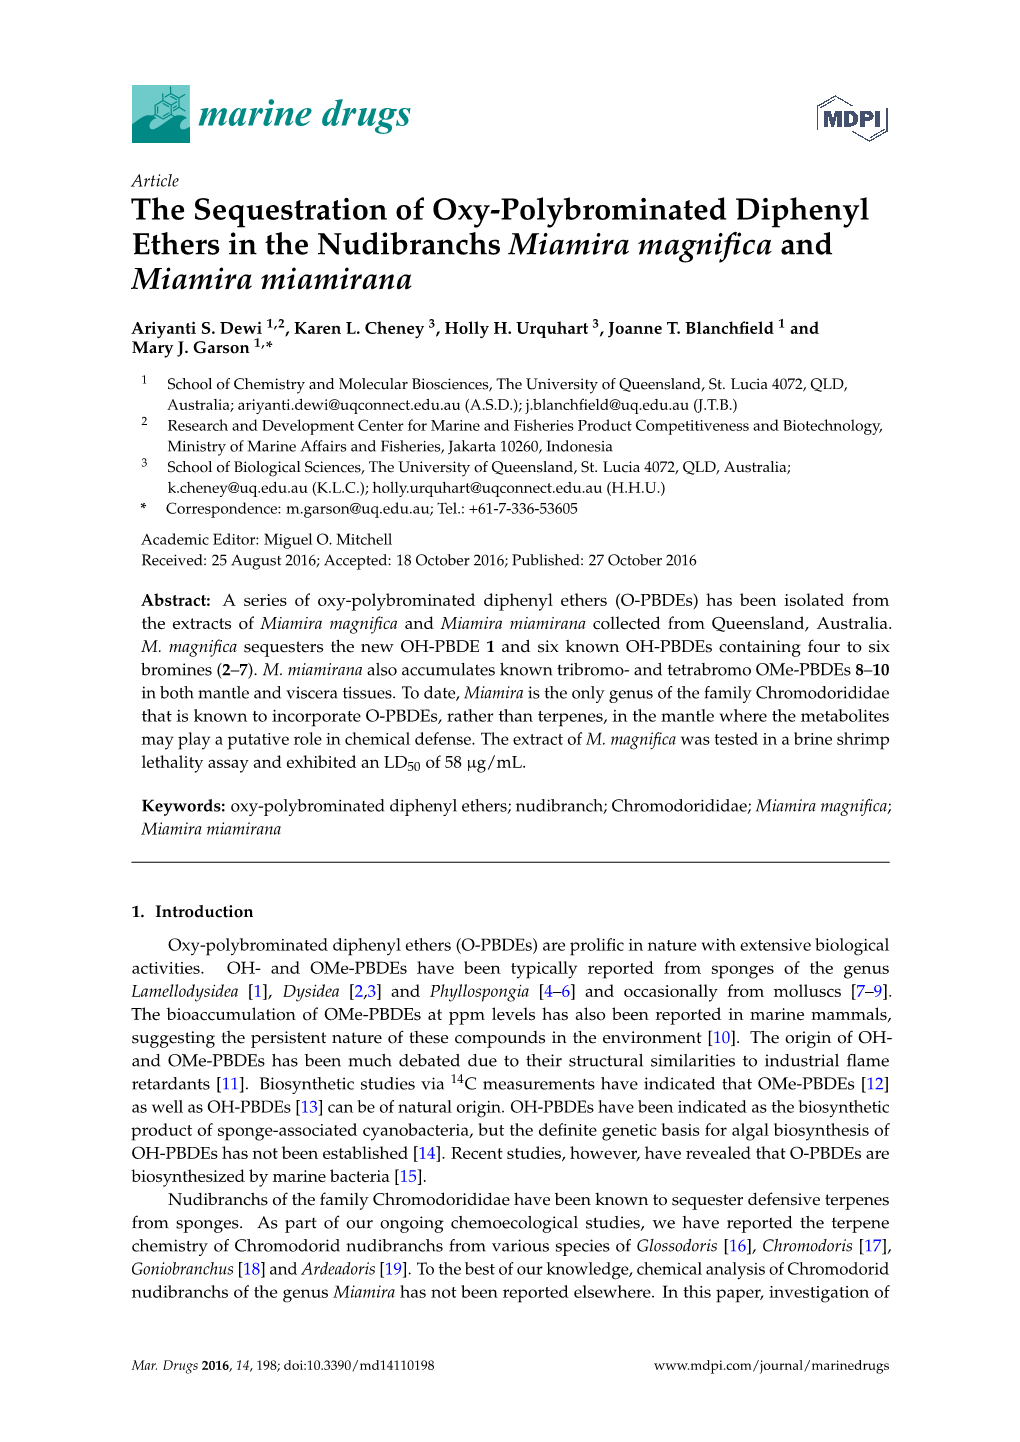 The Sequestration of Oxy-Polybrominated Diphenyl Ethers in the Nudibranchs Miamira Magniﬁca and Miamira Miamirana